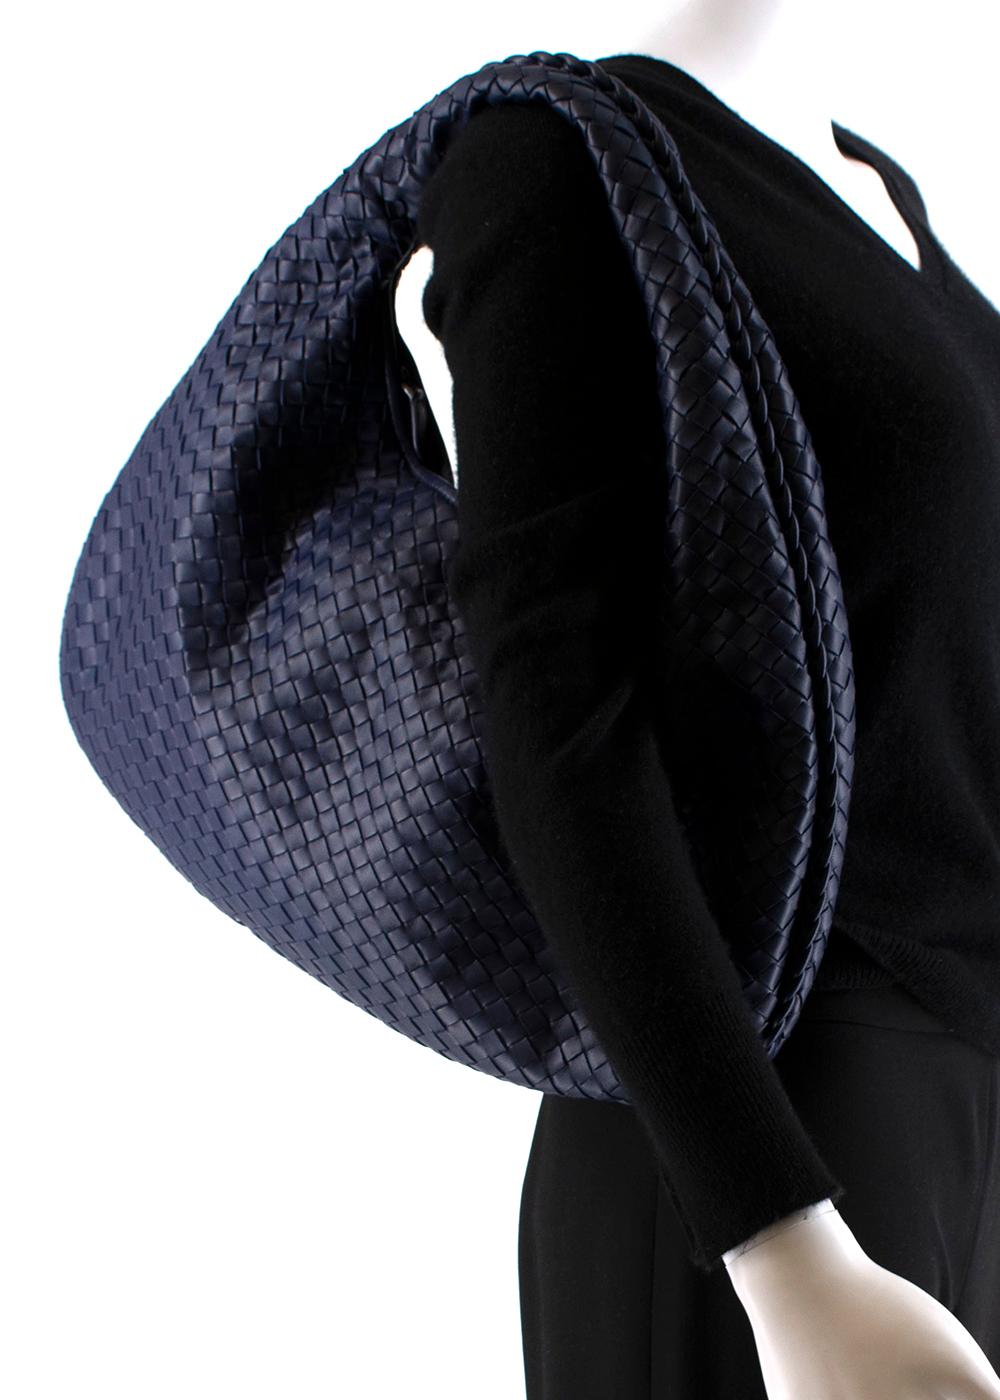 Bottega Veneta Blue Intrecciato Medium Veneta Hobo Bag

Rounded hobo bag in woven leather 
- Woven by hand with a curved, seamless structure 
- Iconic intrecciato 15 weave 
- Zip fastening  
- Soft velvet like Calf suede lined interior with a zipped